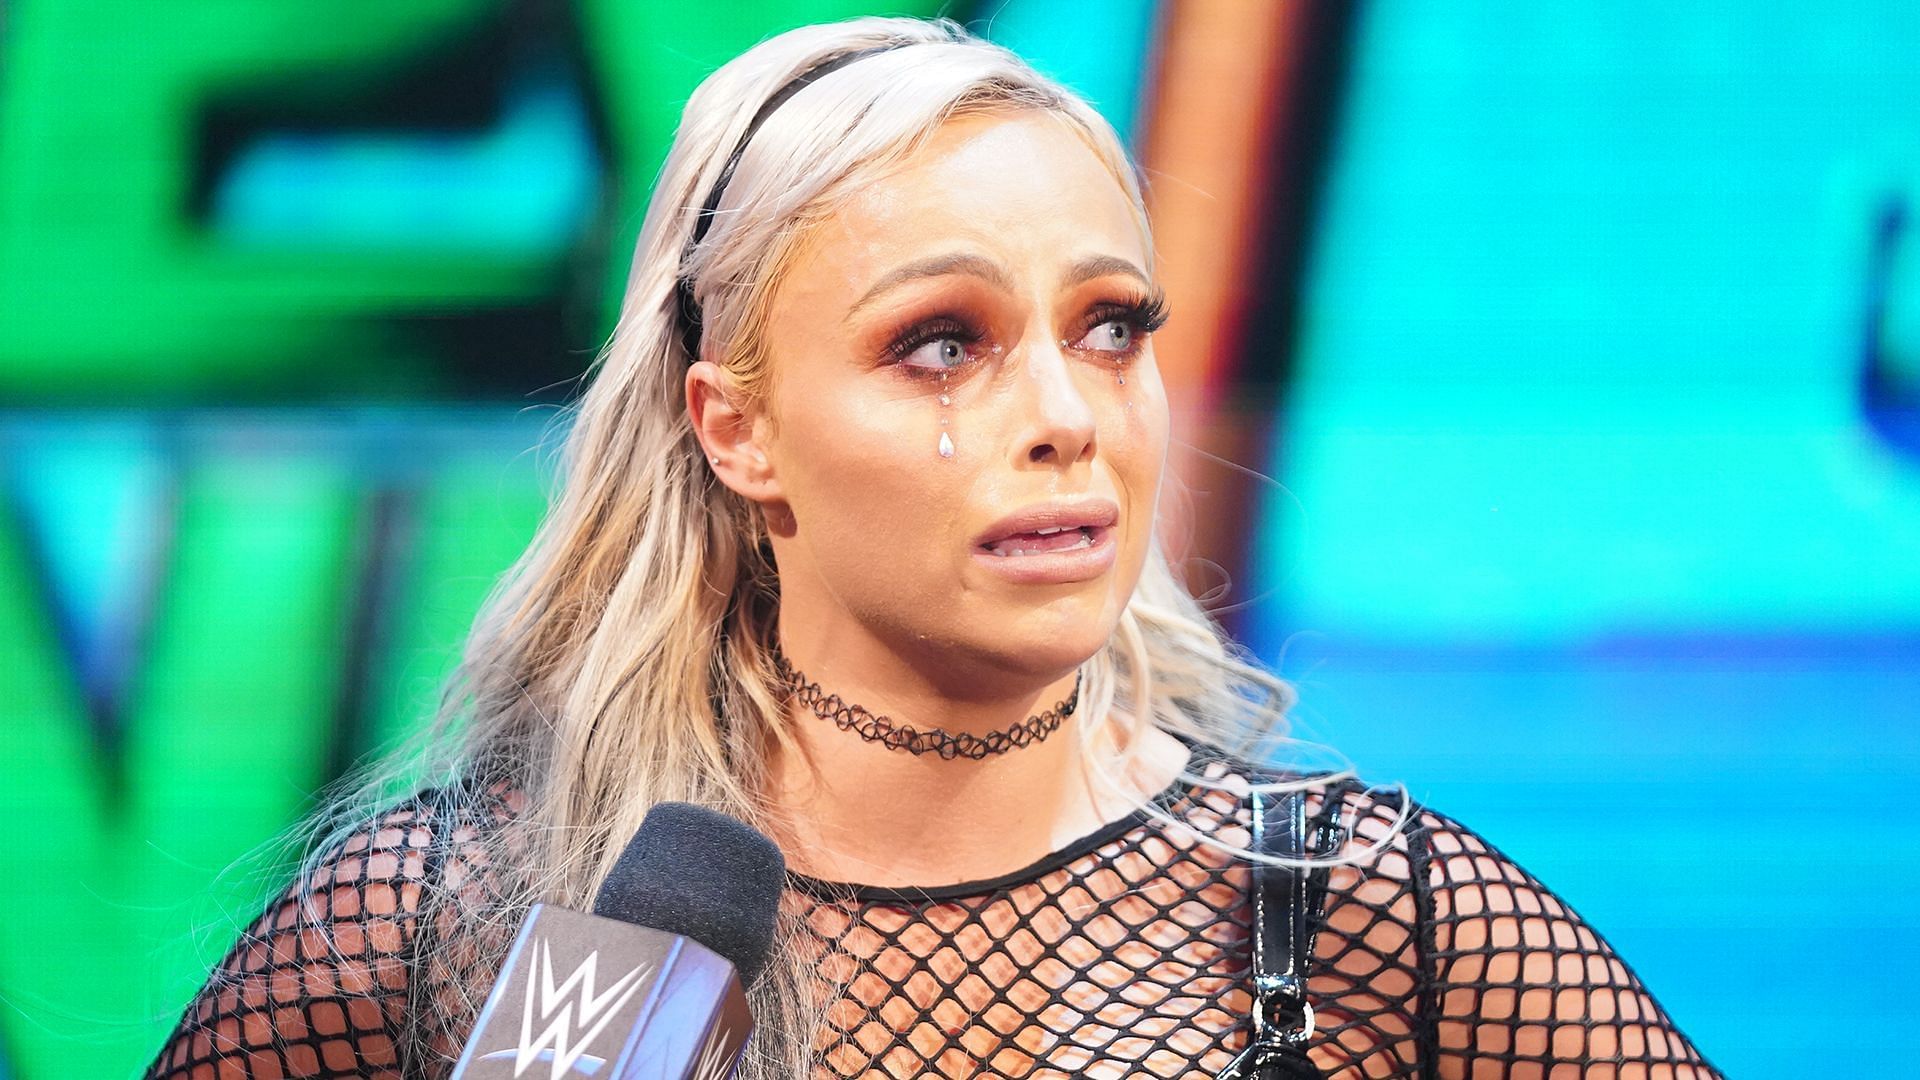 Liv Morgan received a message from WWE Hall of Famer Trish Stratus